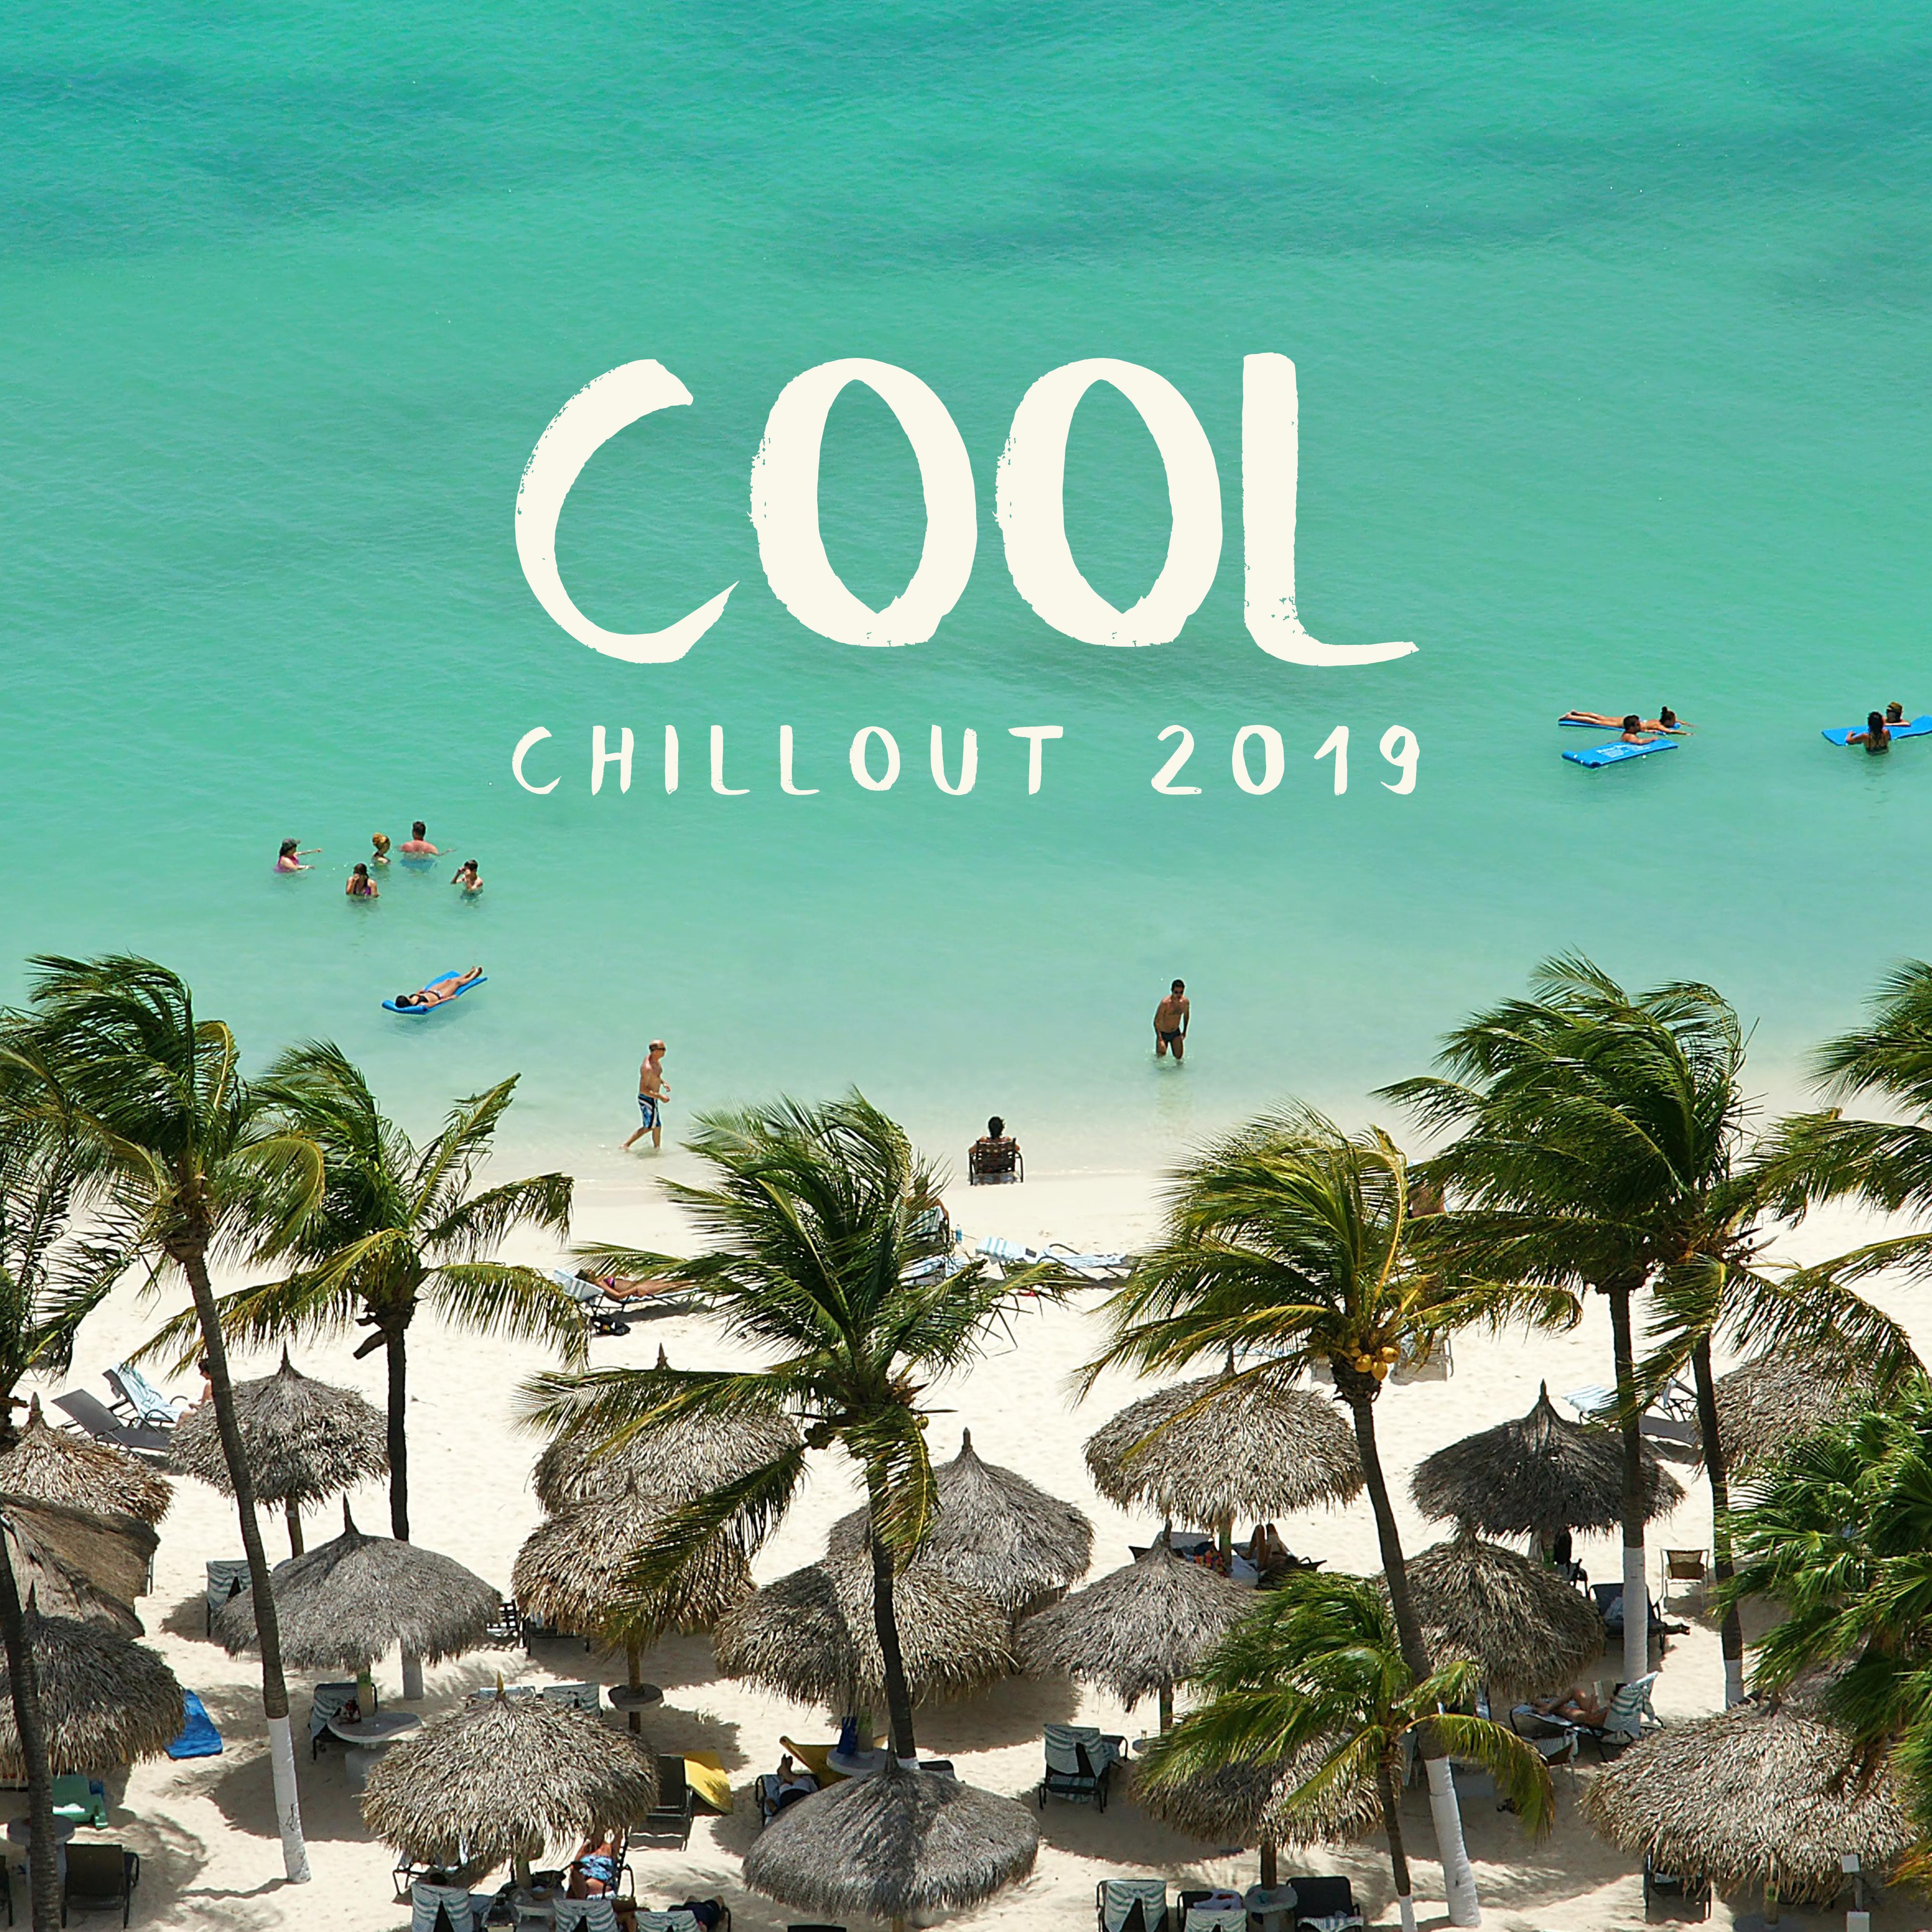 Cool Chillout 2019: Perfect Chill Out Music Mix, Sounds of Tropical Holidays, Summer Beach Beats, Ibiza Lounge